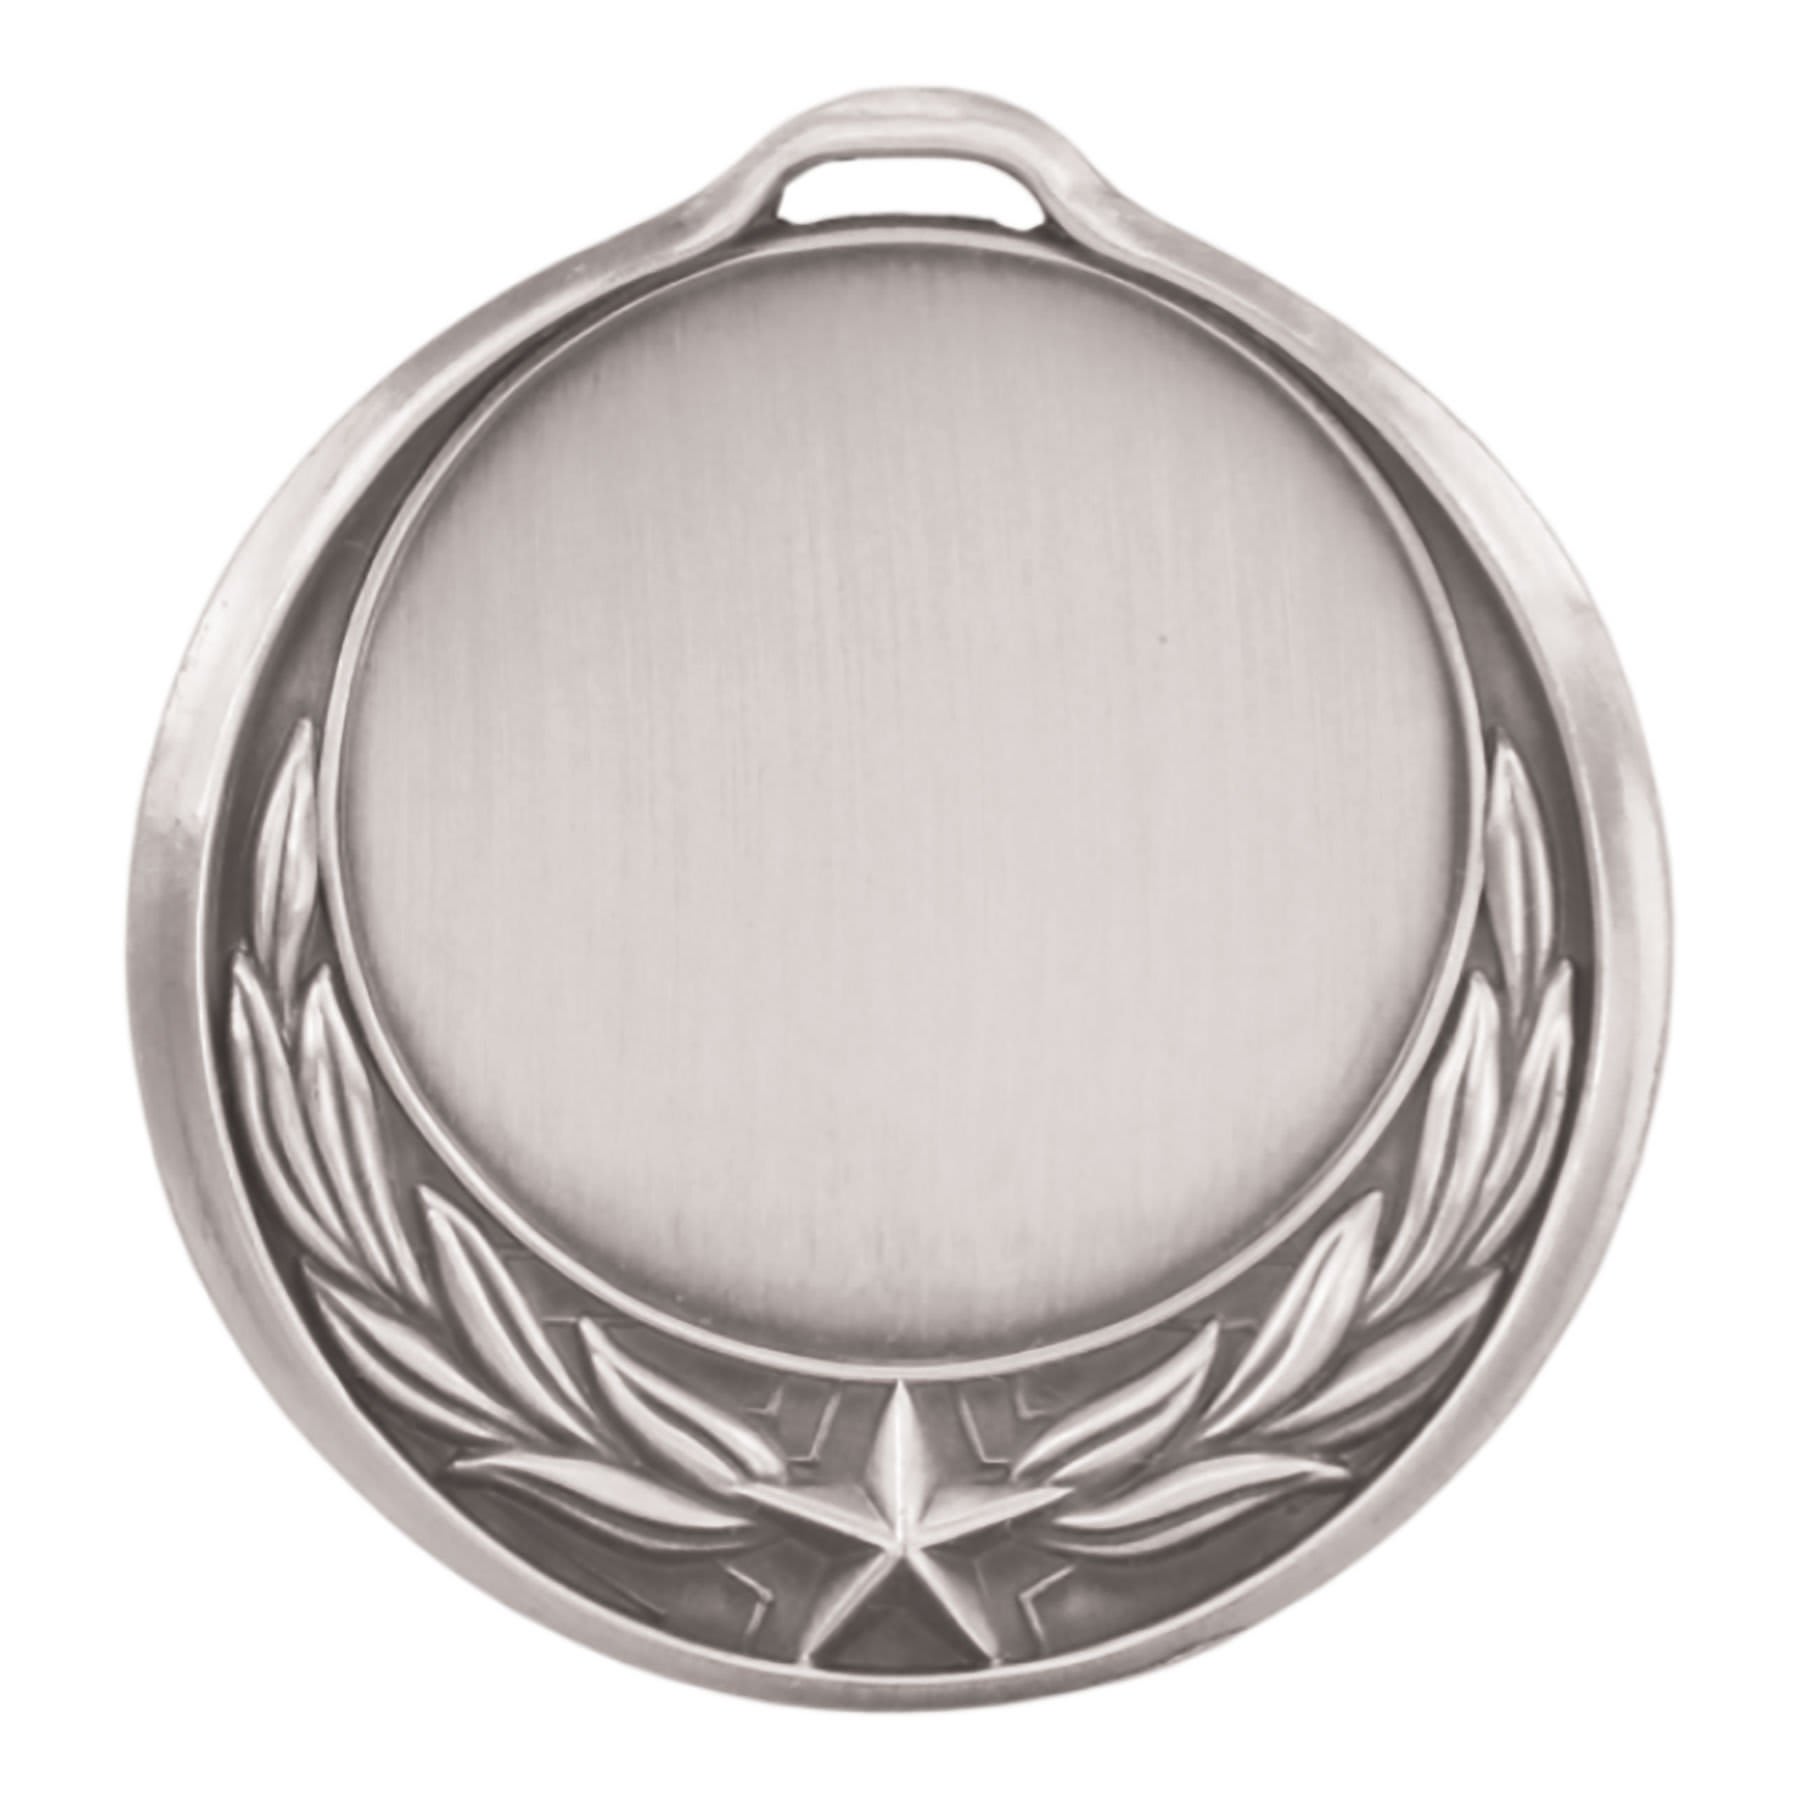 2-3/4" Antiqued Star/Wreath, 2" Insert Holder Medal (double sided) - Craftworks NW, LLC